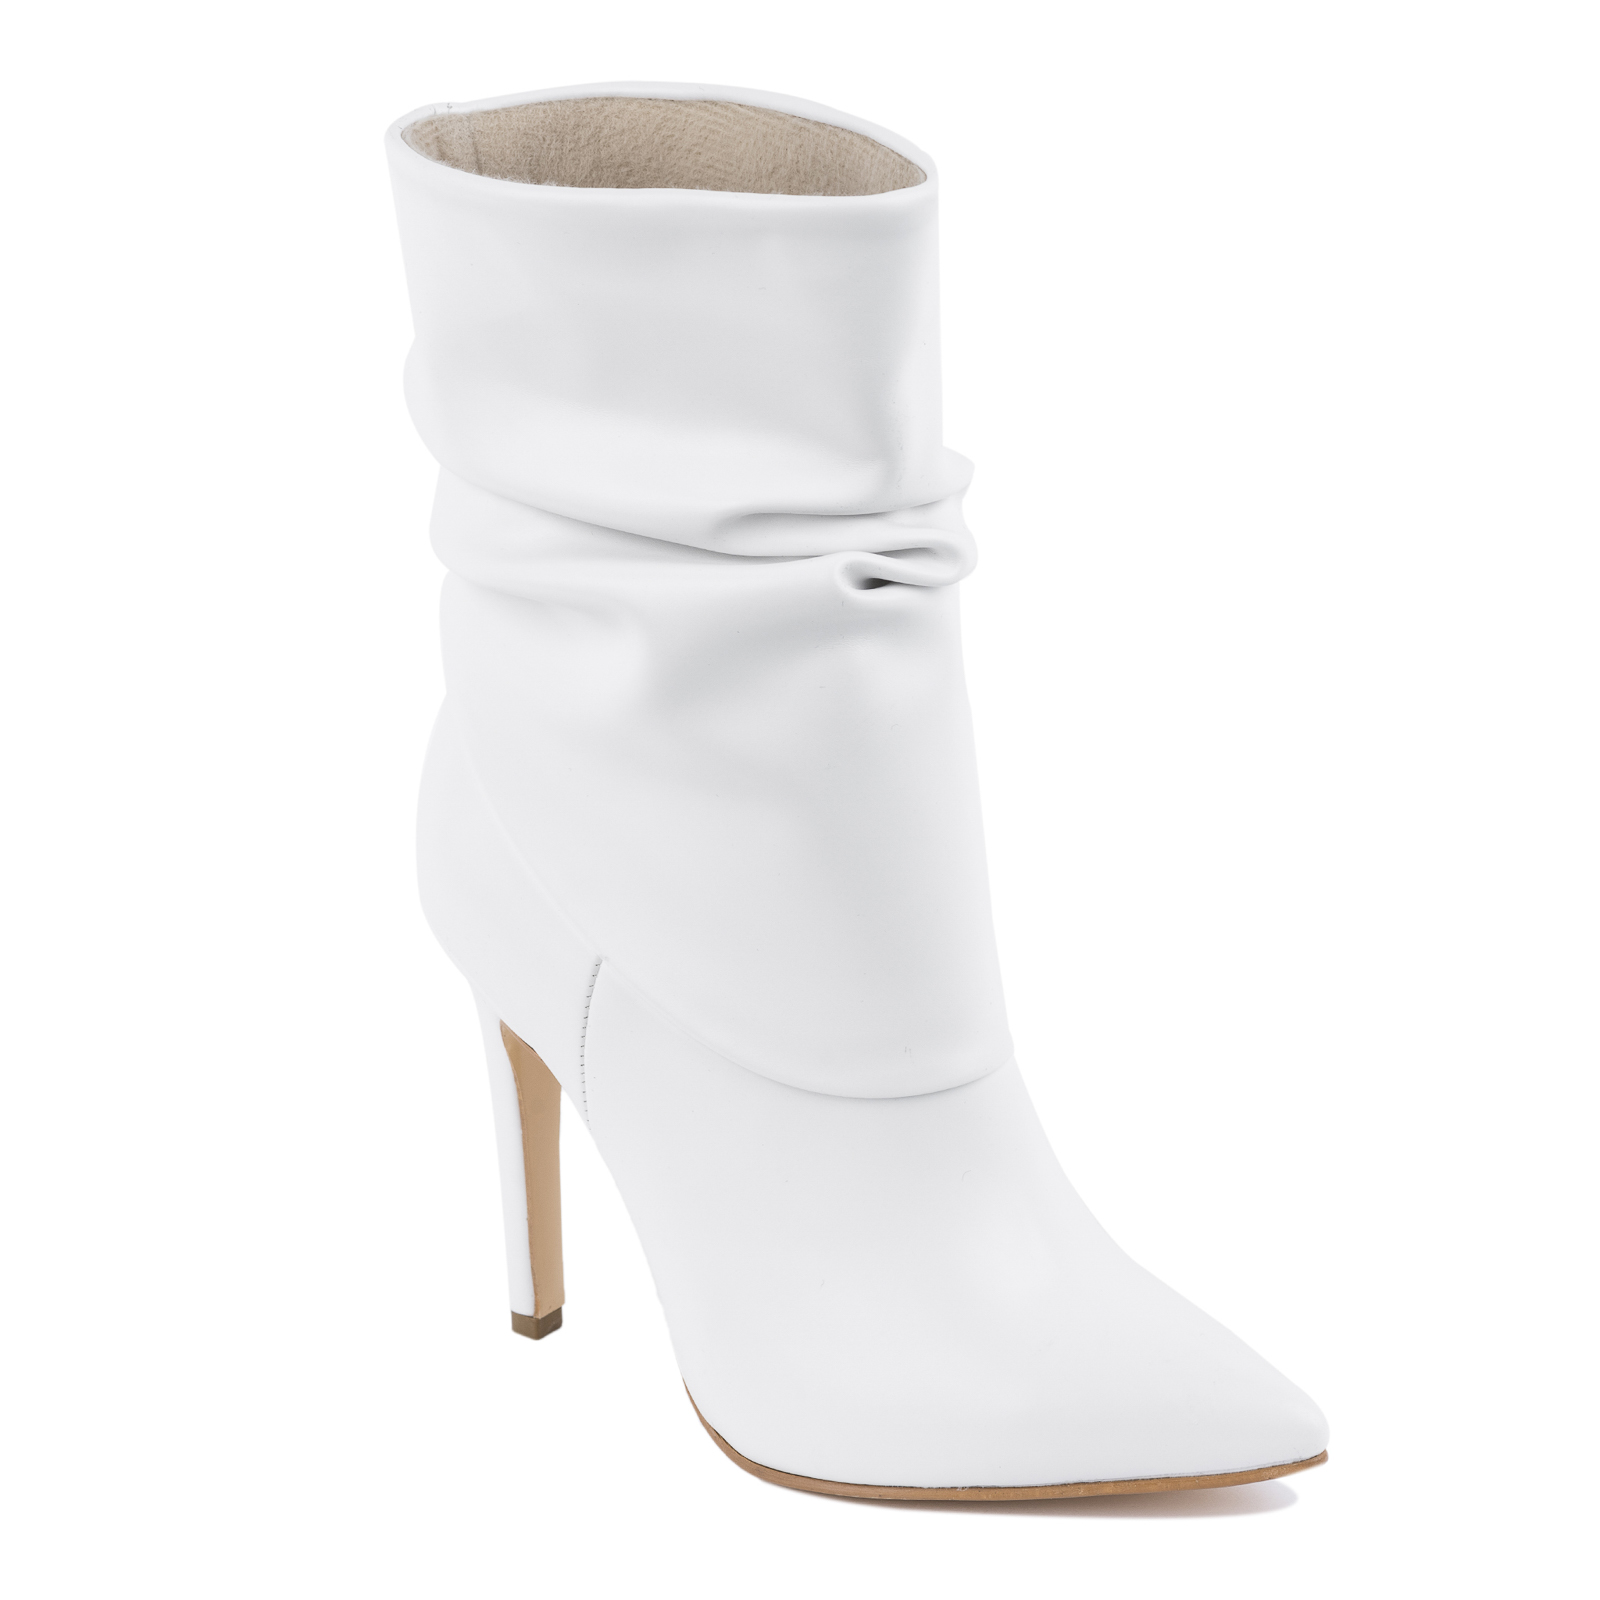 POINTED WRINKLED ANKLE BOOTS WITH THIN HEEL - WHITE